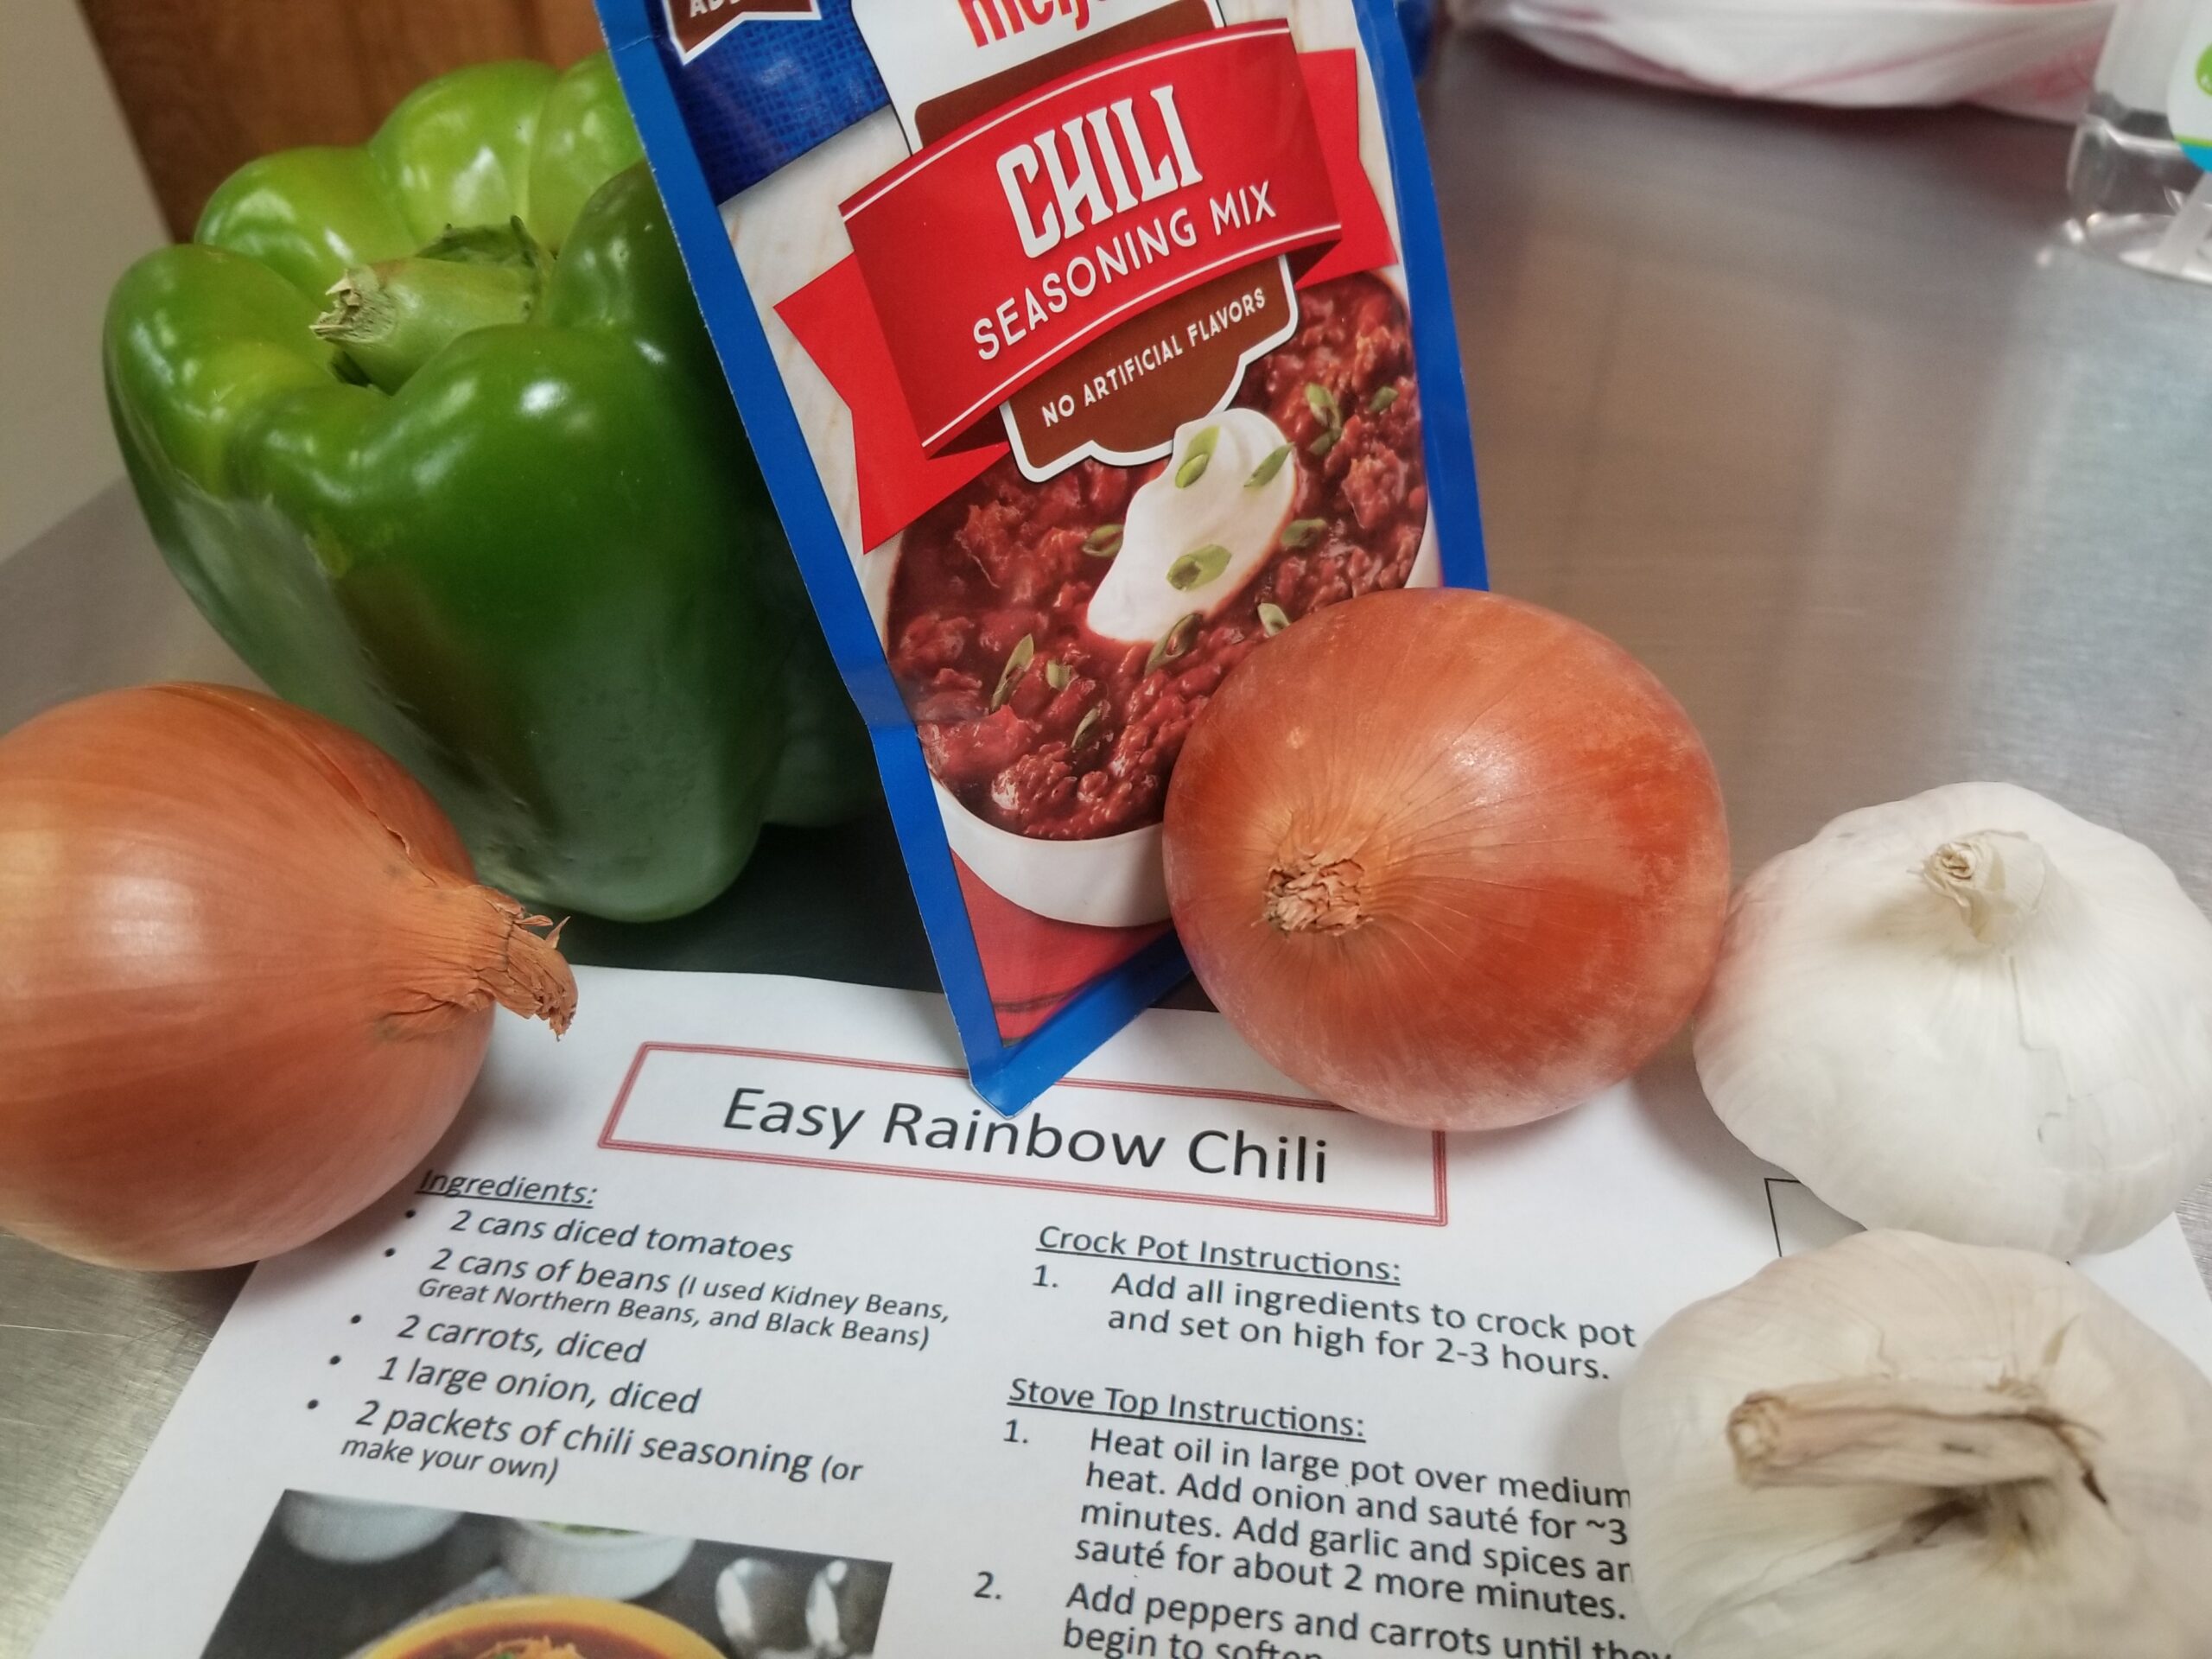 A piece of paper with a recipe for "Easy Rainbow Chili" sits on a stainless steel table, surrounded by some of the ingredients to make the dish (chili seasoning, onion, garlic, and a green bell pepper.